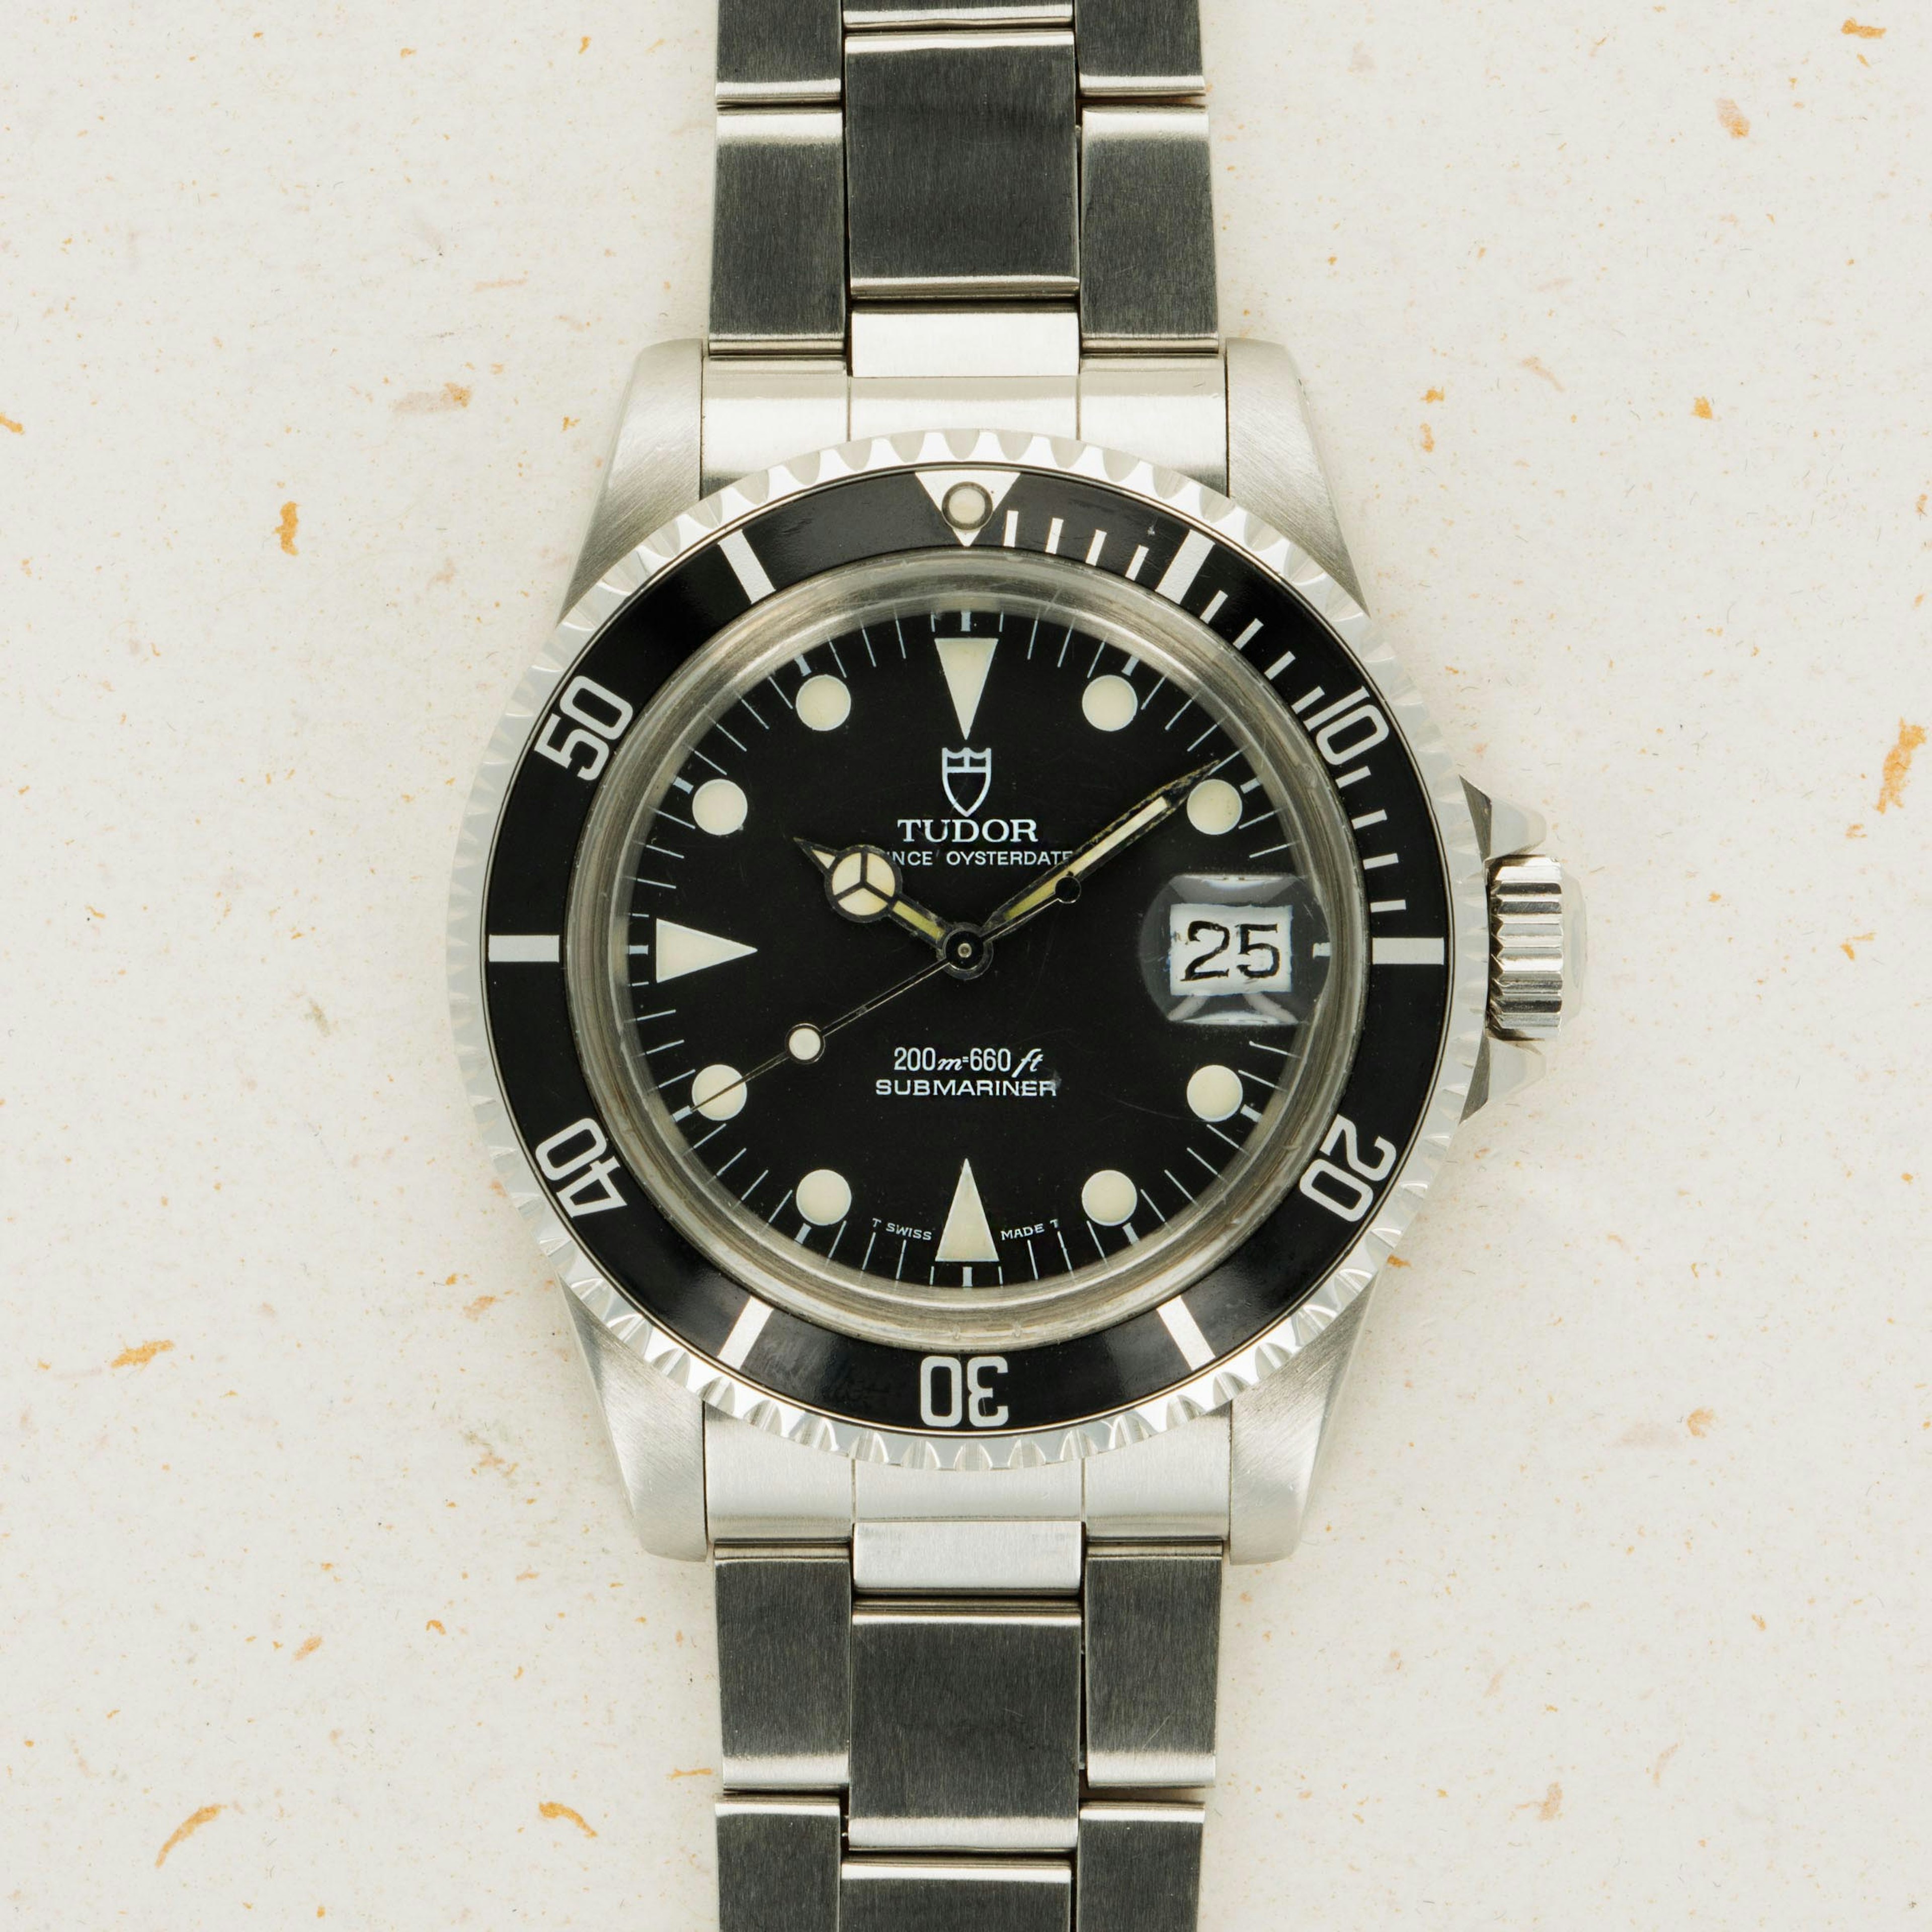 Tudor Submariner 79090 Box and Papers | Auctions | Loupe This